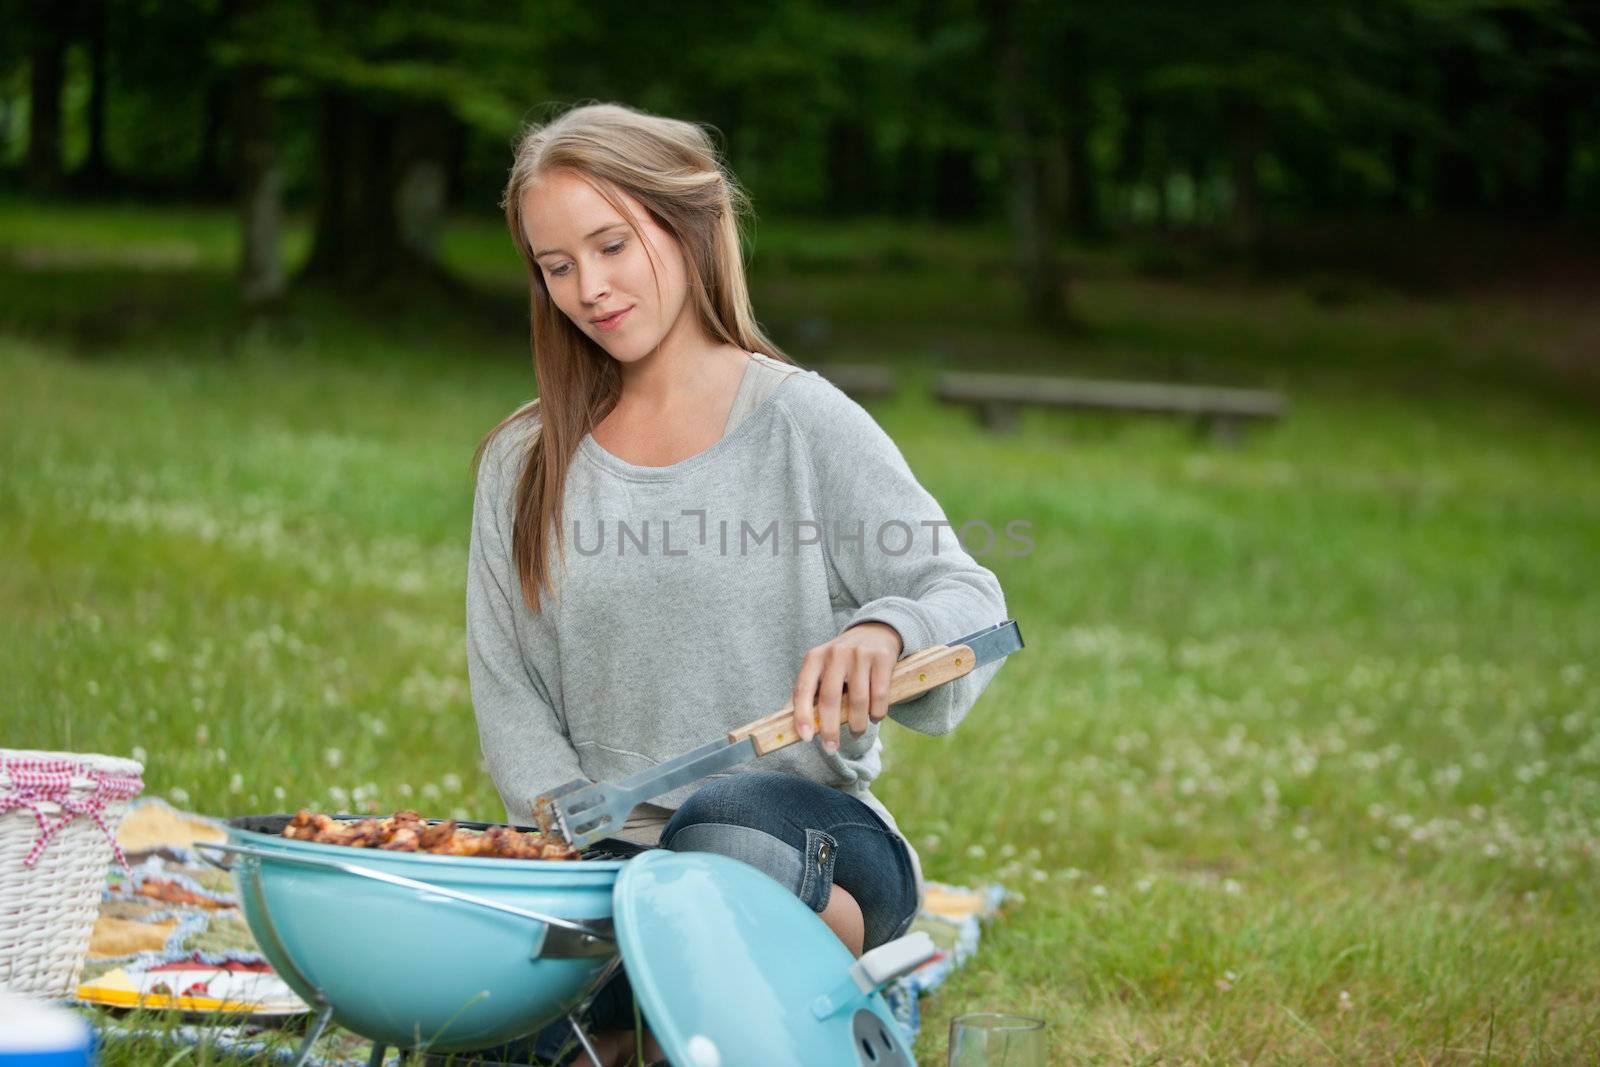 Cute young woman in casual wear cooking food on a portable barbecue in park at weekend outing